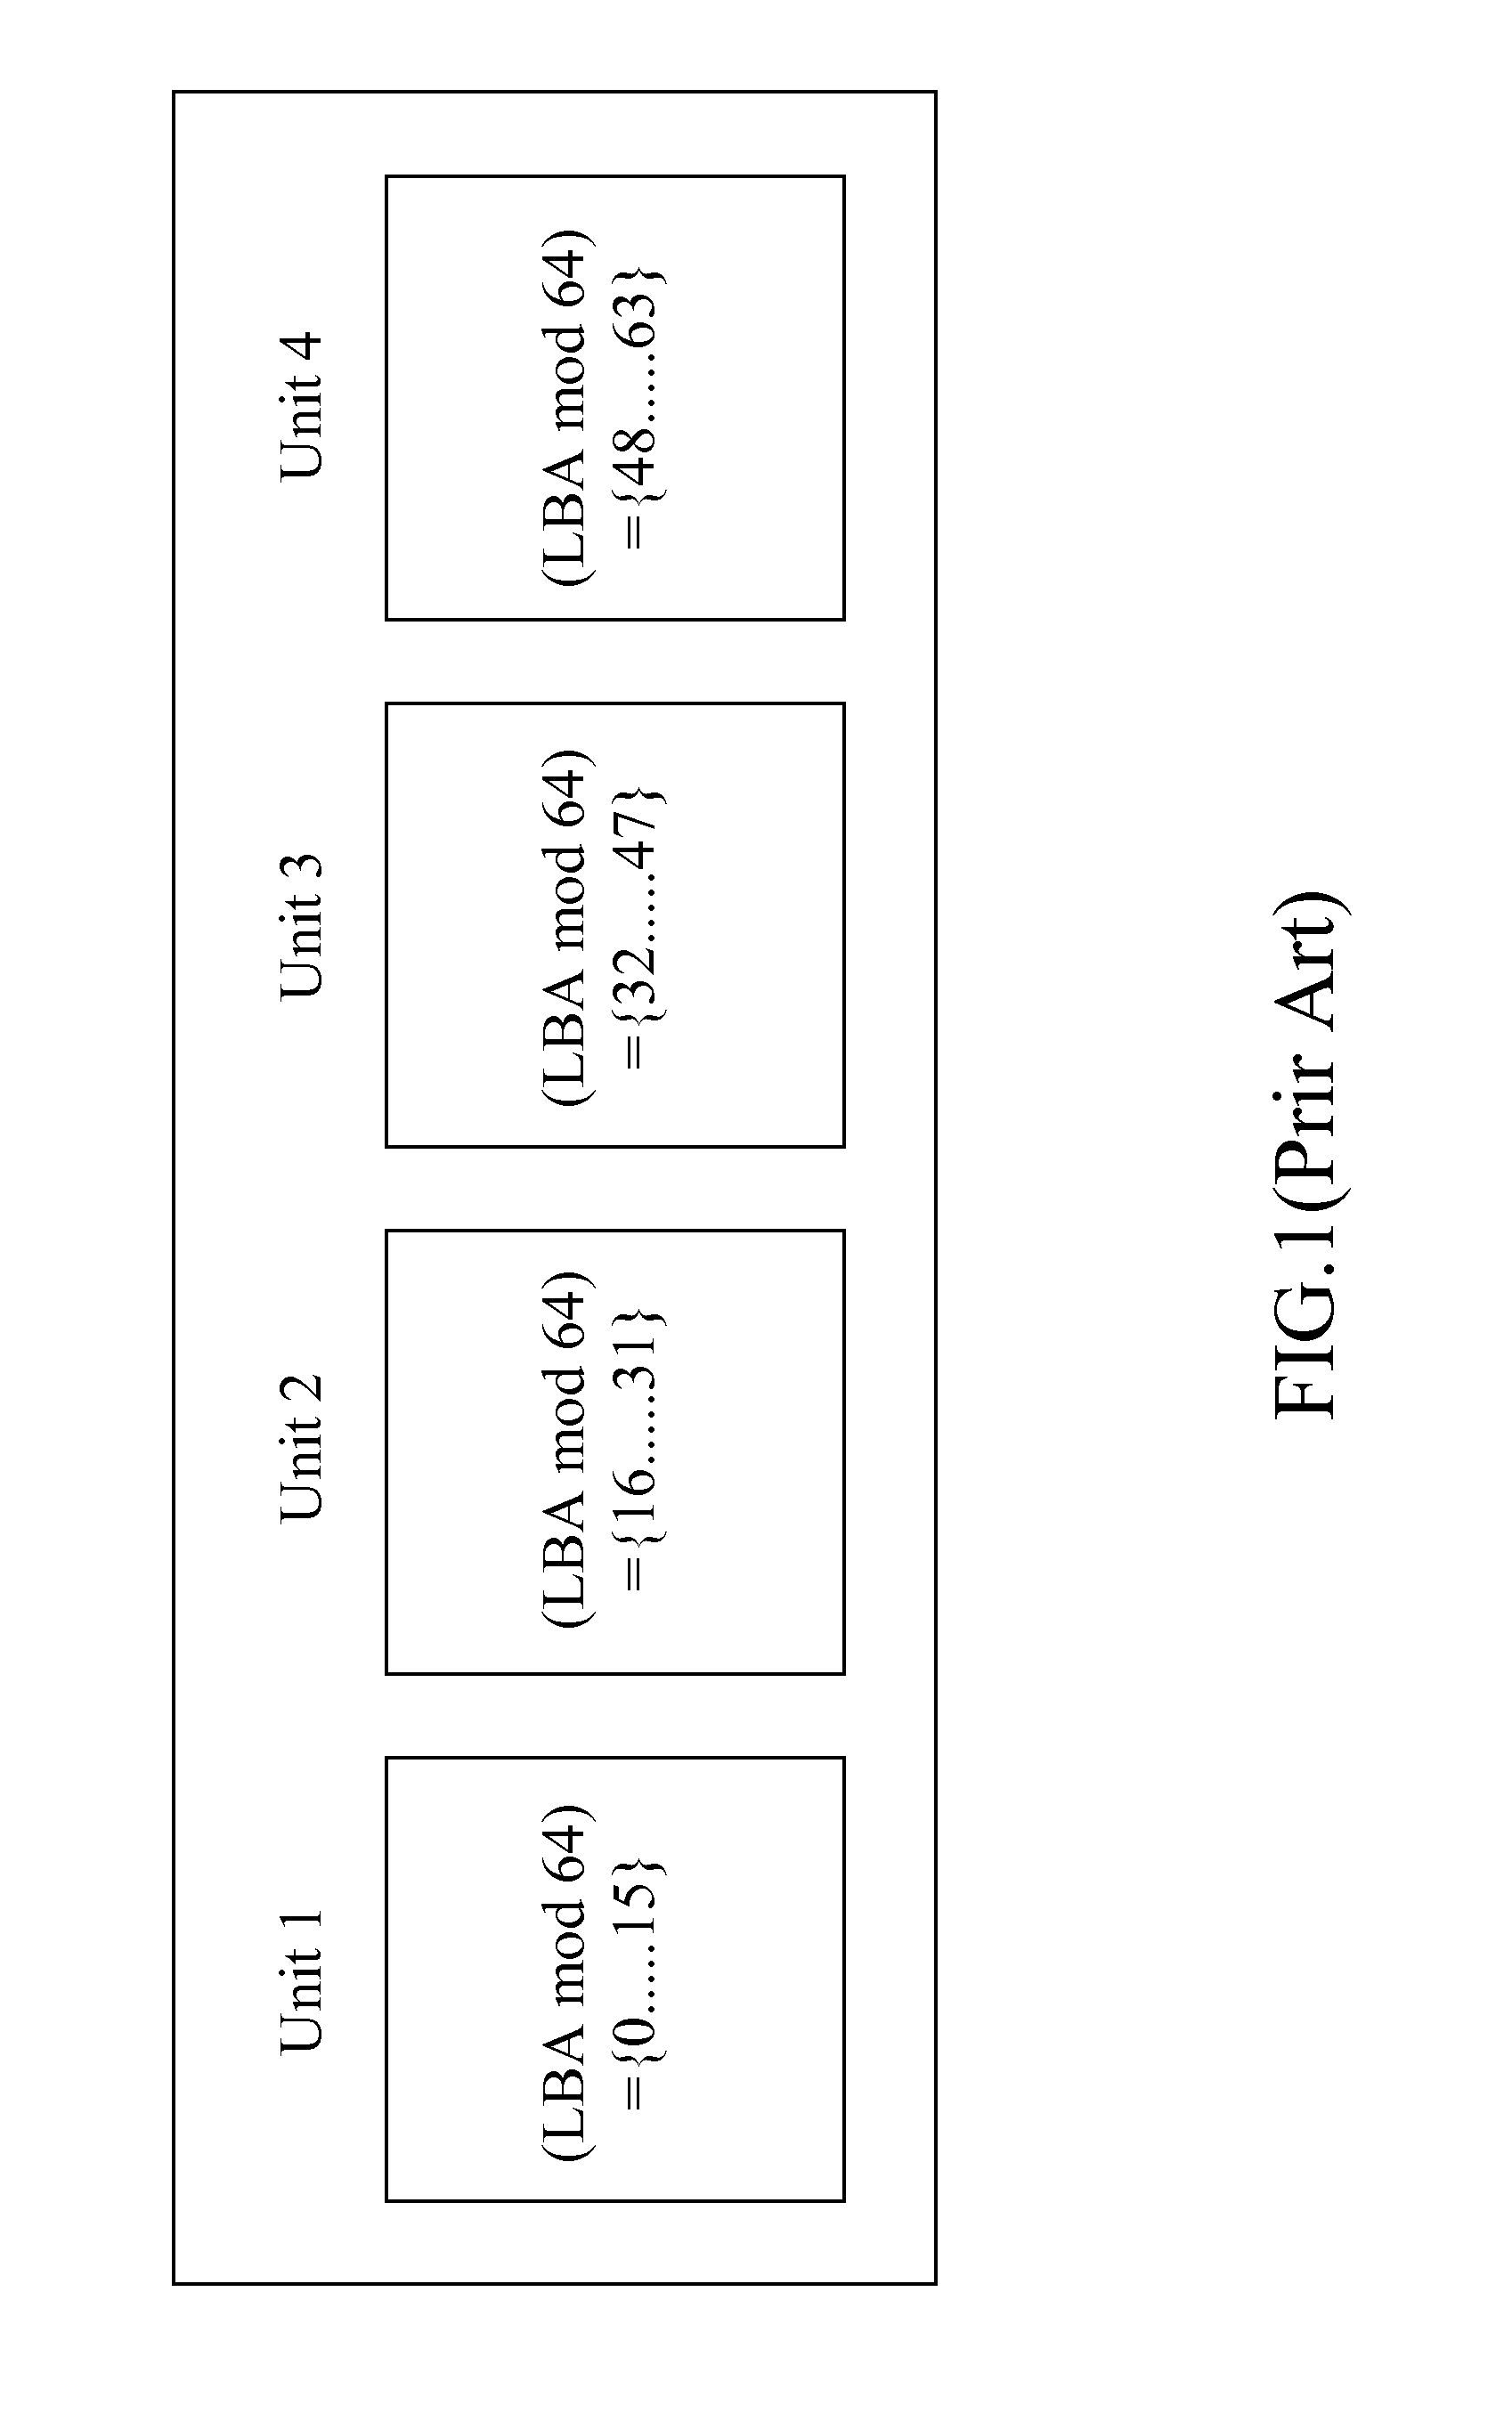 System and method of wear leveling for a non-volatile memory